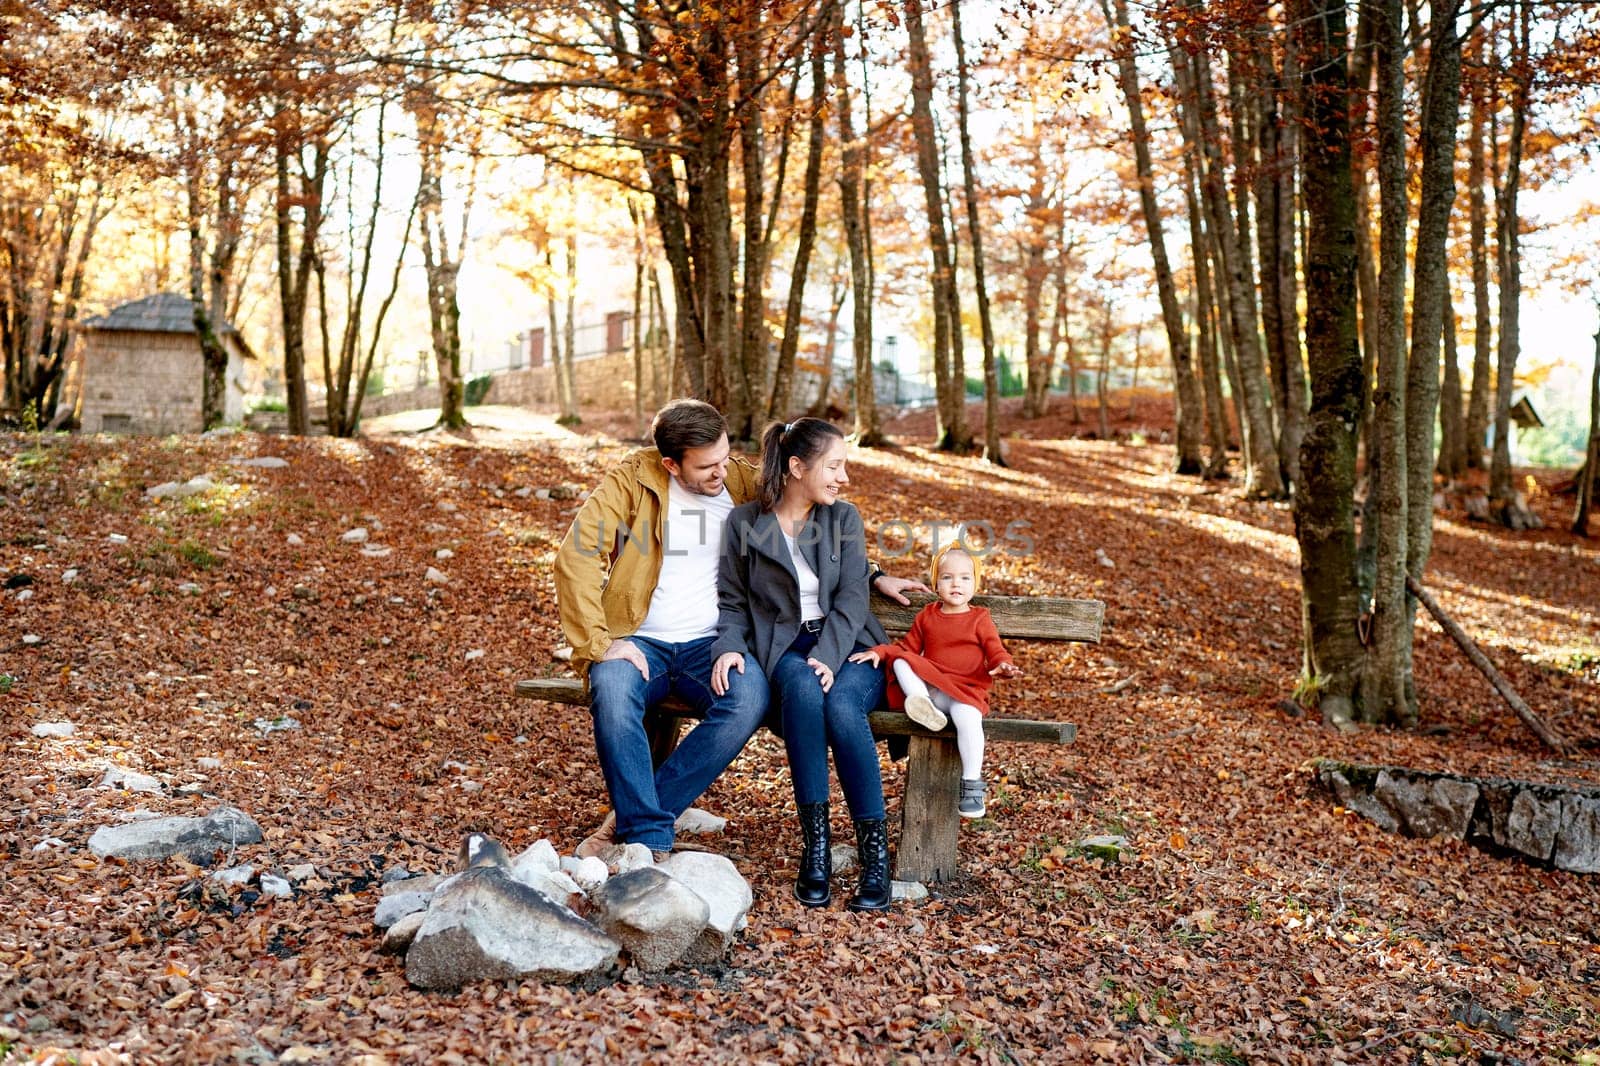 Smiling mom and dad look at a little girl sitting next to her on a bench in the autumn forest. High quality photo